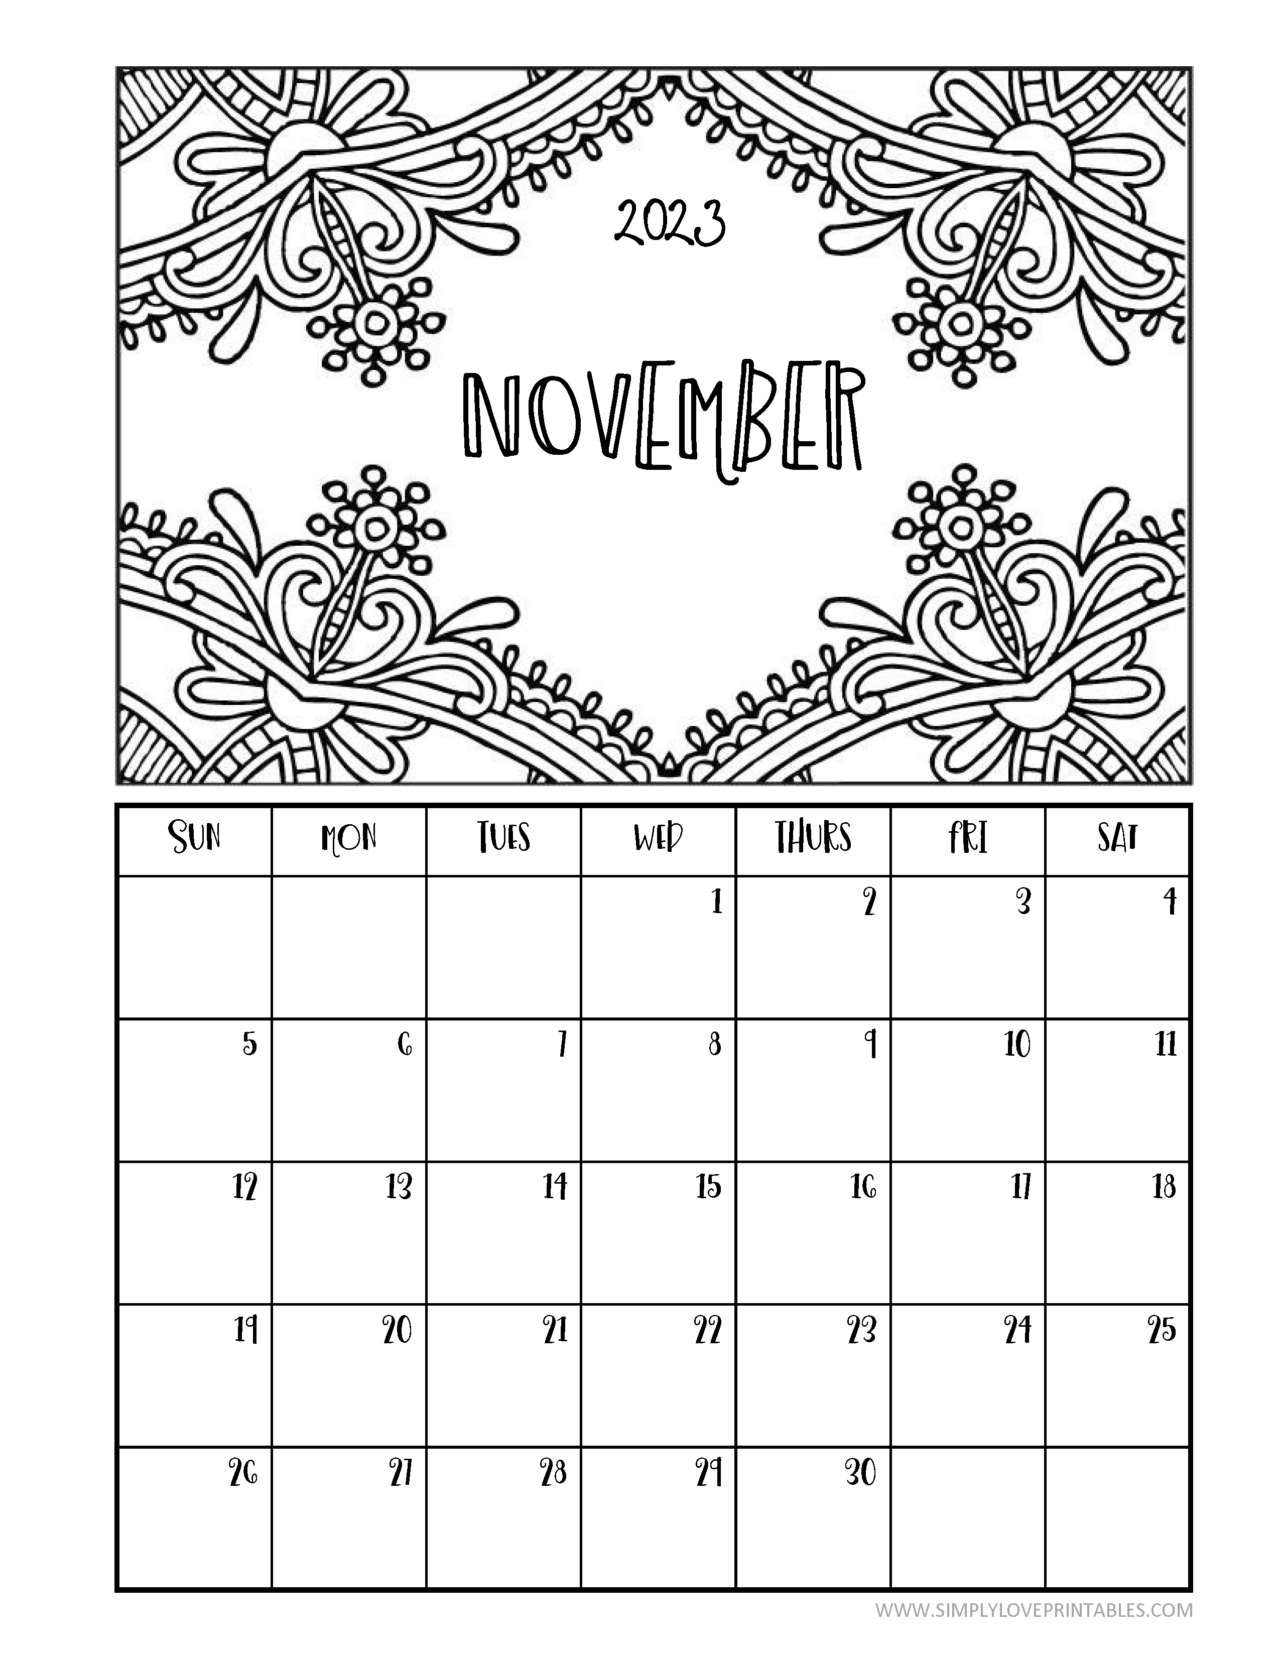 November Image For Kids Coloring Page